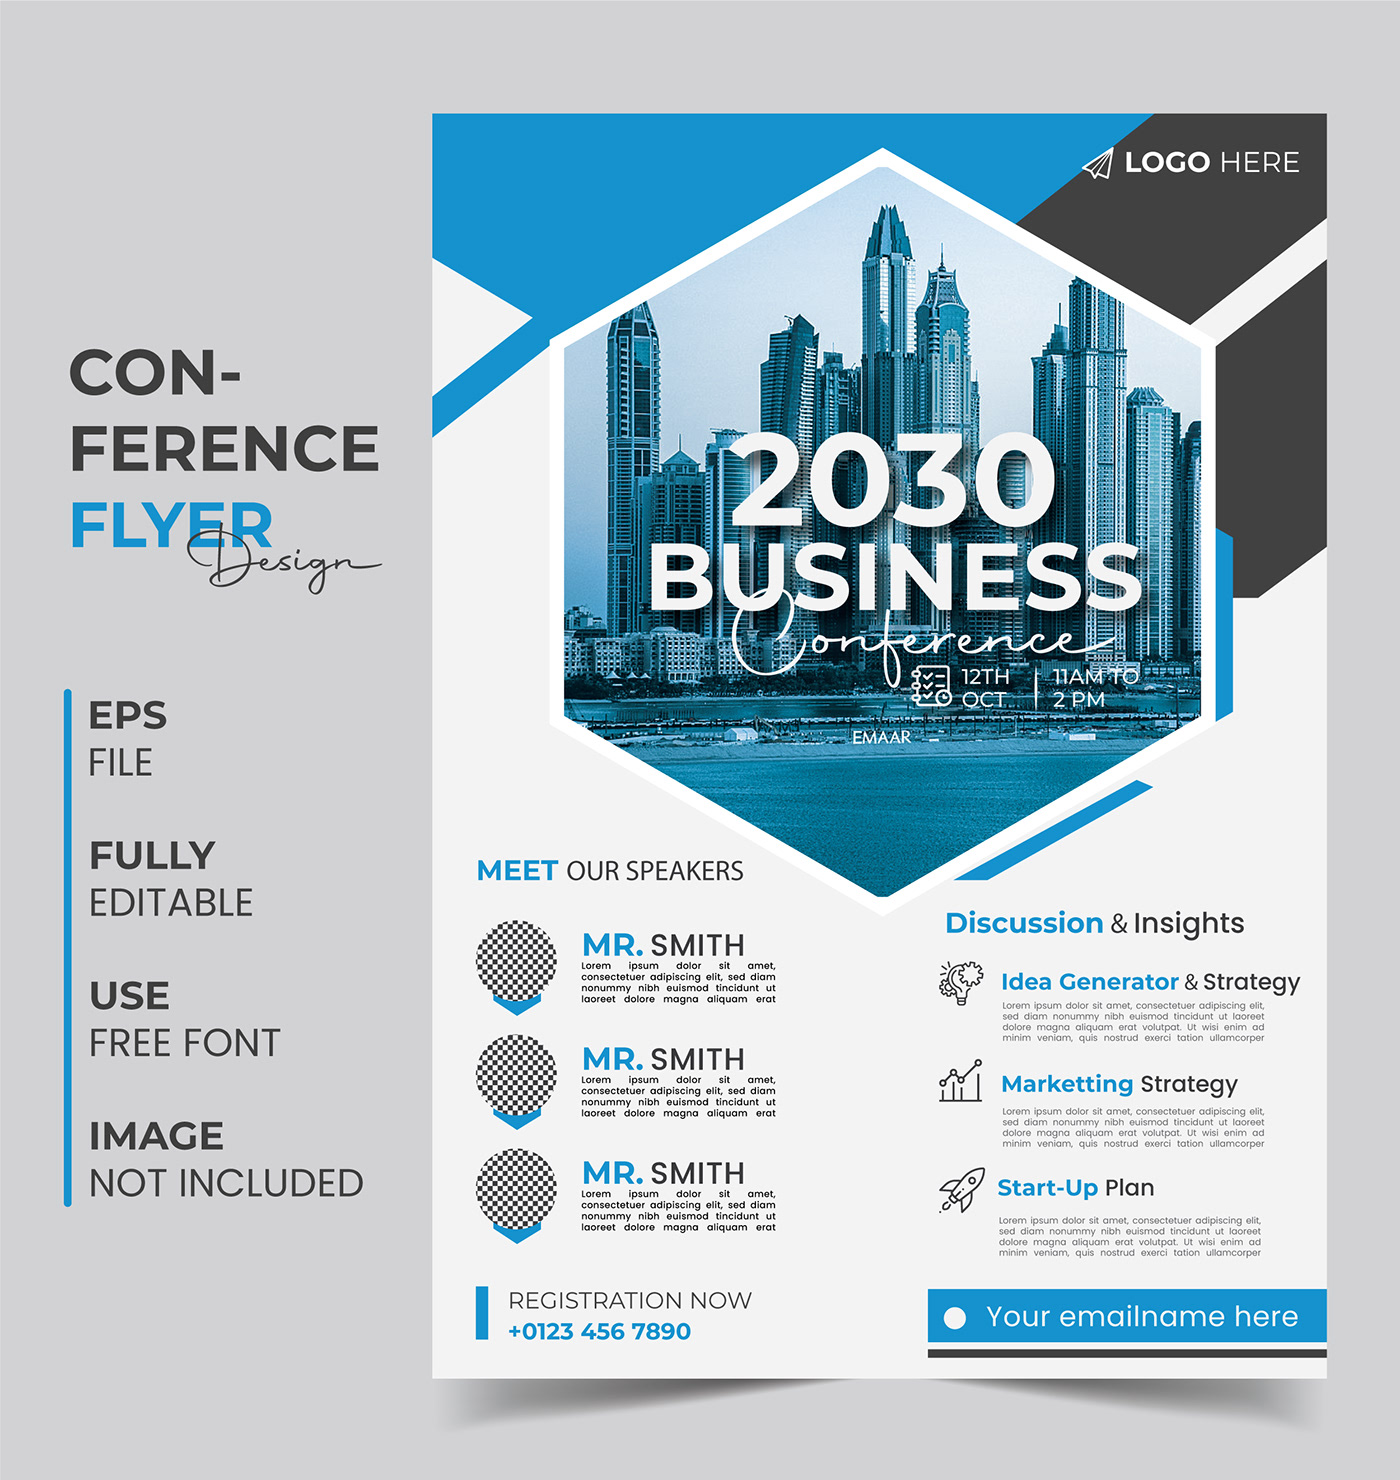 flyer Flyer Design flyer template print ready conference conference flyer business flyer Corporate Flyer Design Meeting Flyer